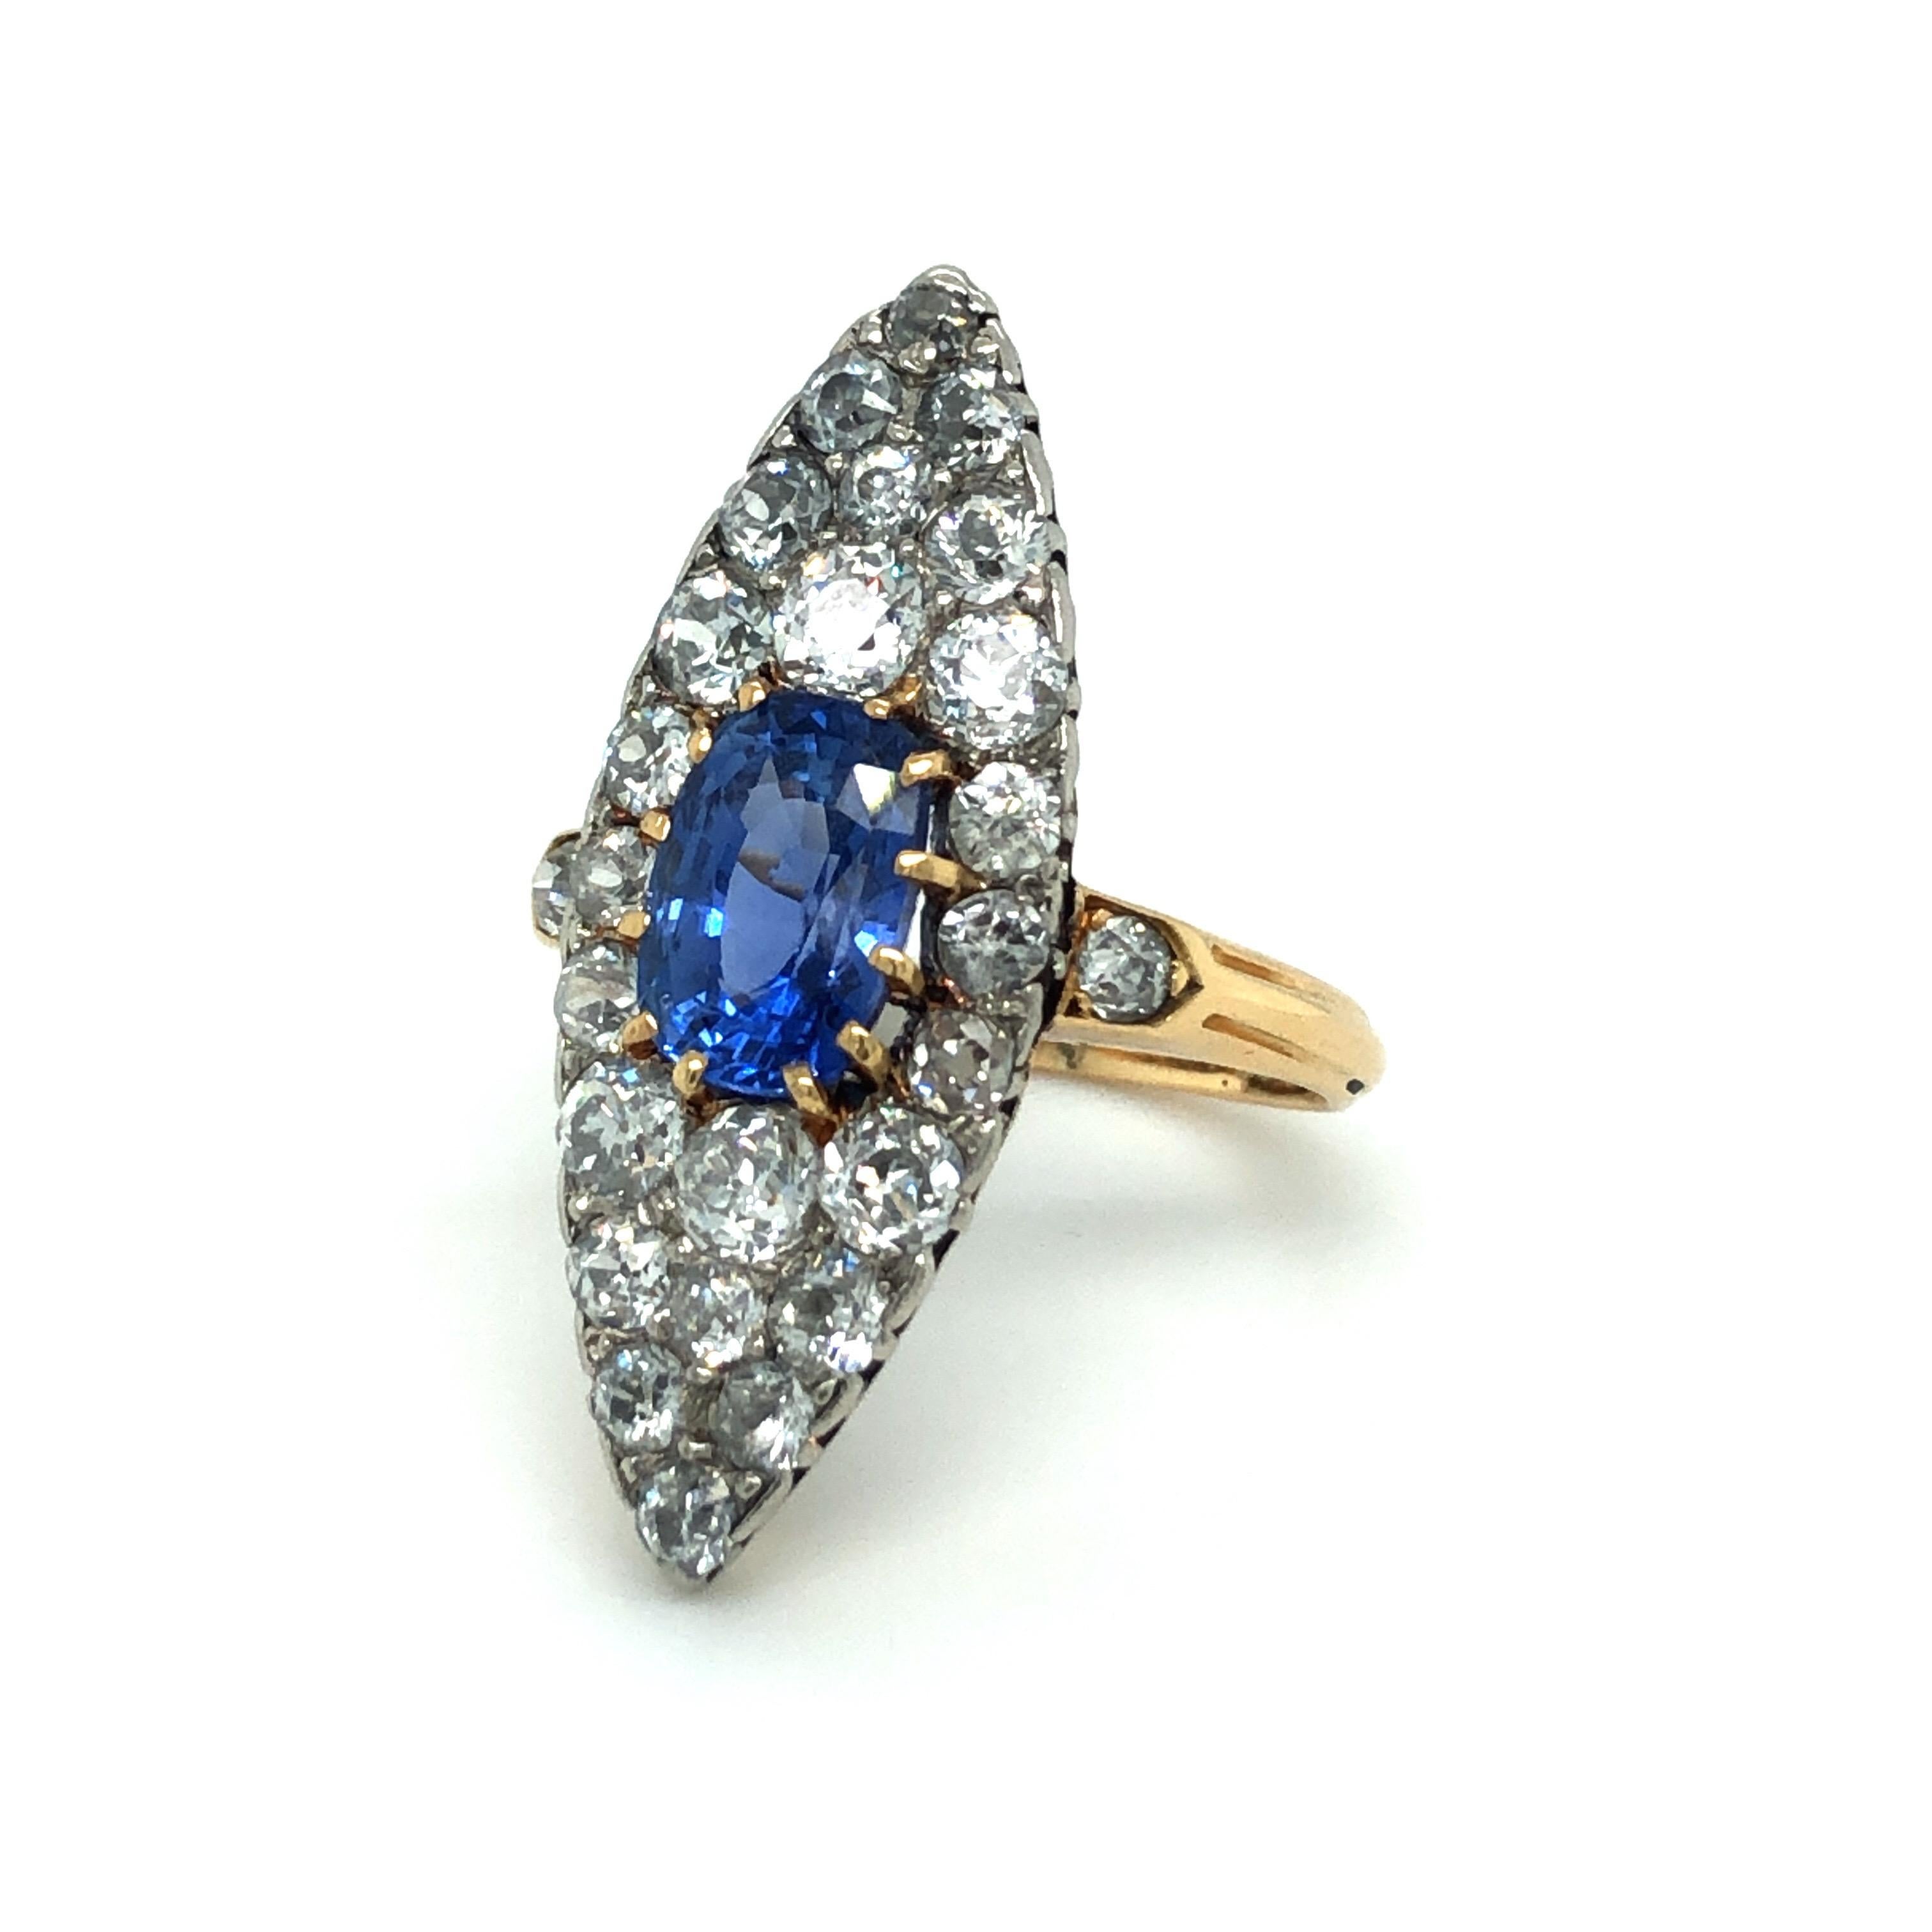 Stunning 18 karat yellow gold platinum sapphire diamond dress cocktail ring, circa 1905.
This fairy-tale jewel is crafted in 18 karat yellow gold with platinum and features a marquise-shaped plaque set with a cushion-shaped sapphire of circa 2.5